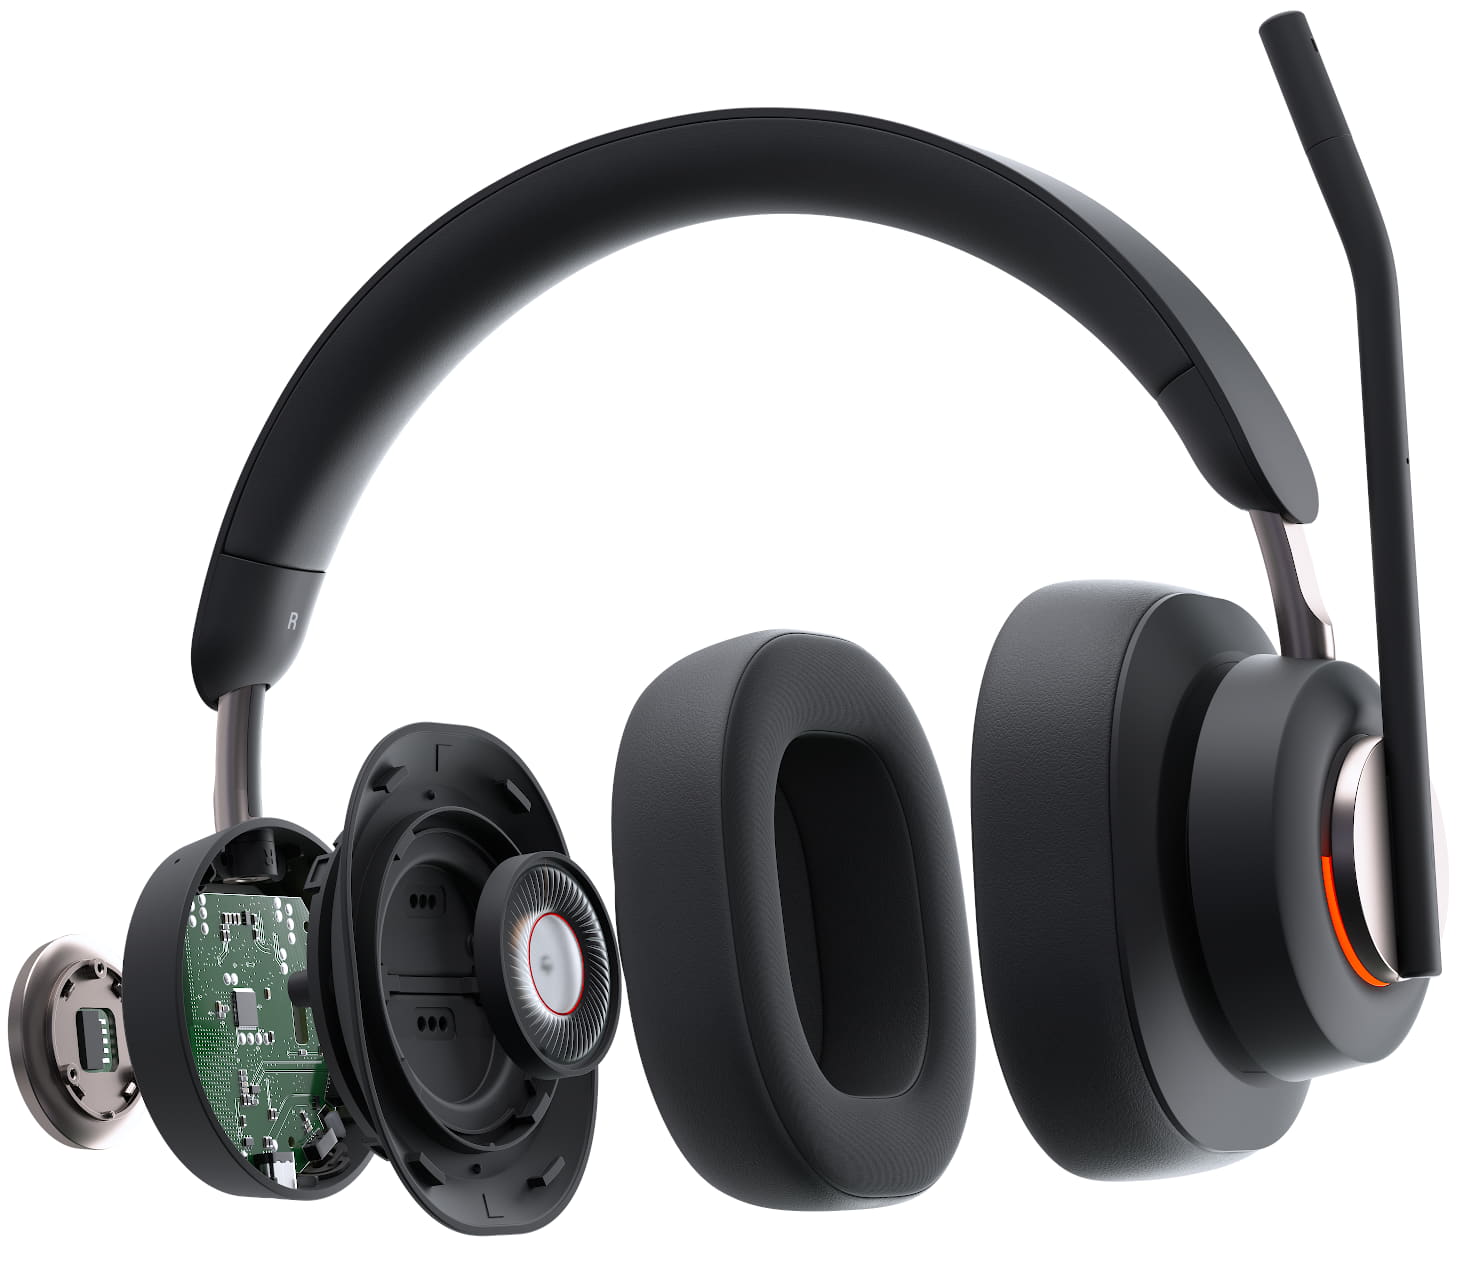 Full exploded view of Kensington H3000 Bluetooth Over-Ear Headset showing  AI-powered environmental noise-canceling technology, passive noise-cancelation technology, and 40mm neodymium drivers
                                    